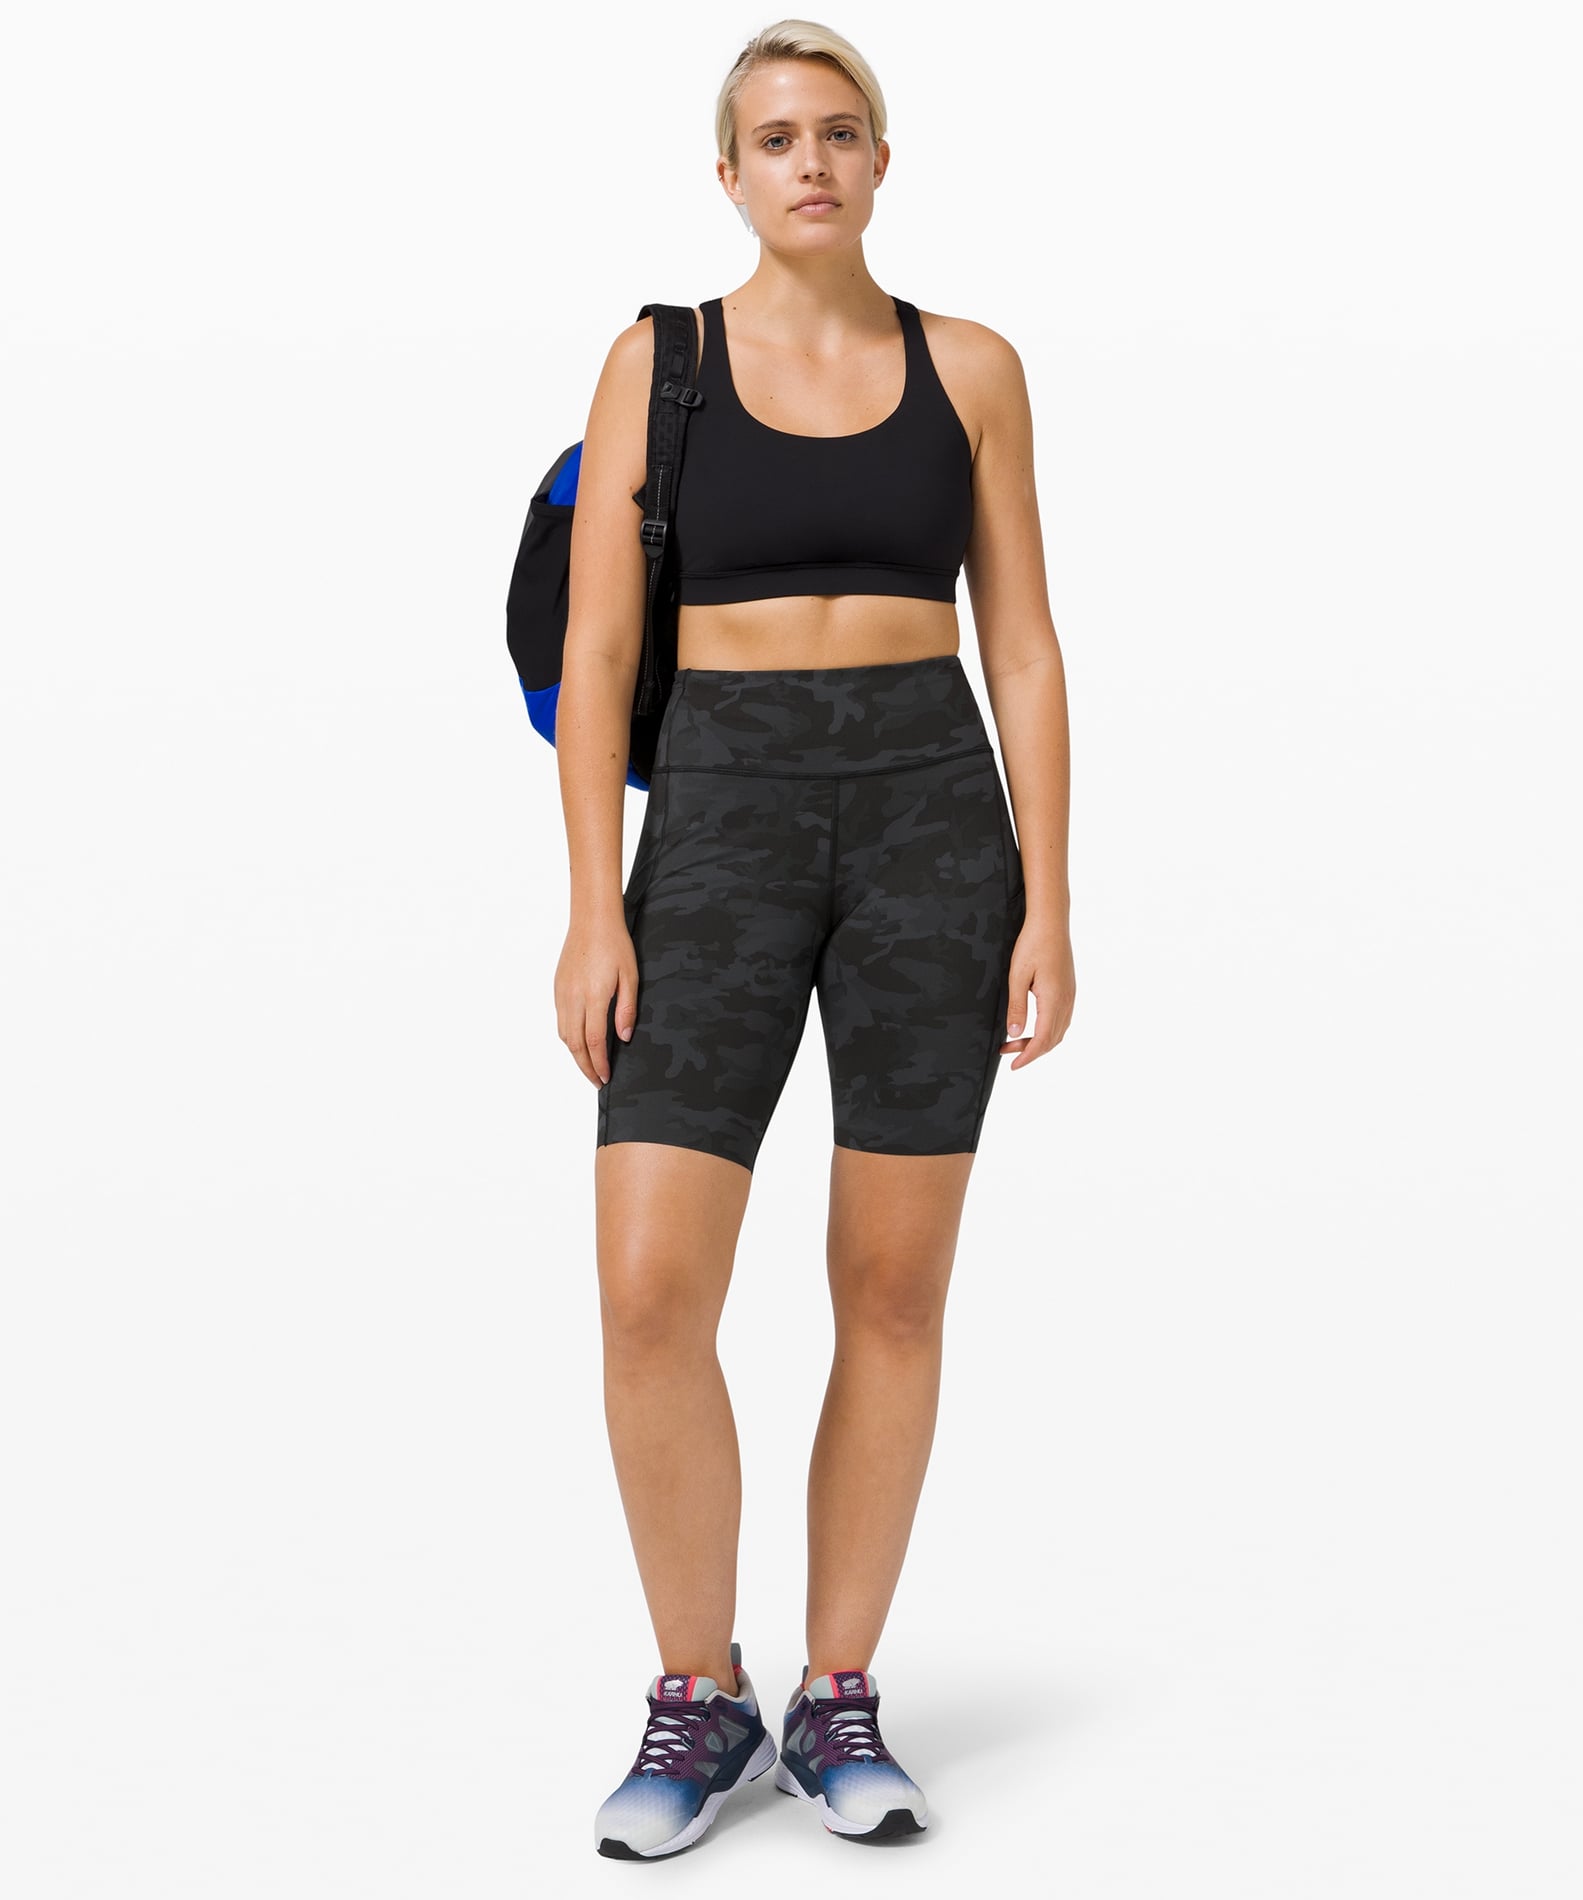 The Best Workout Clothes on Sale | January 2021 | POPSUGAR Fitness